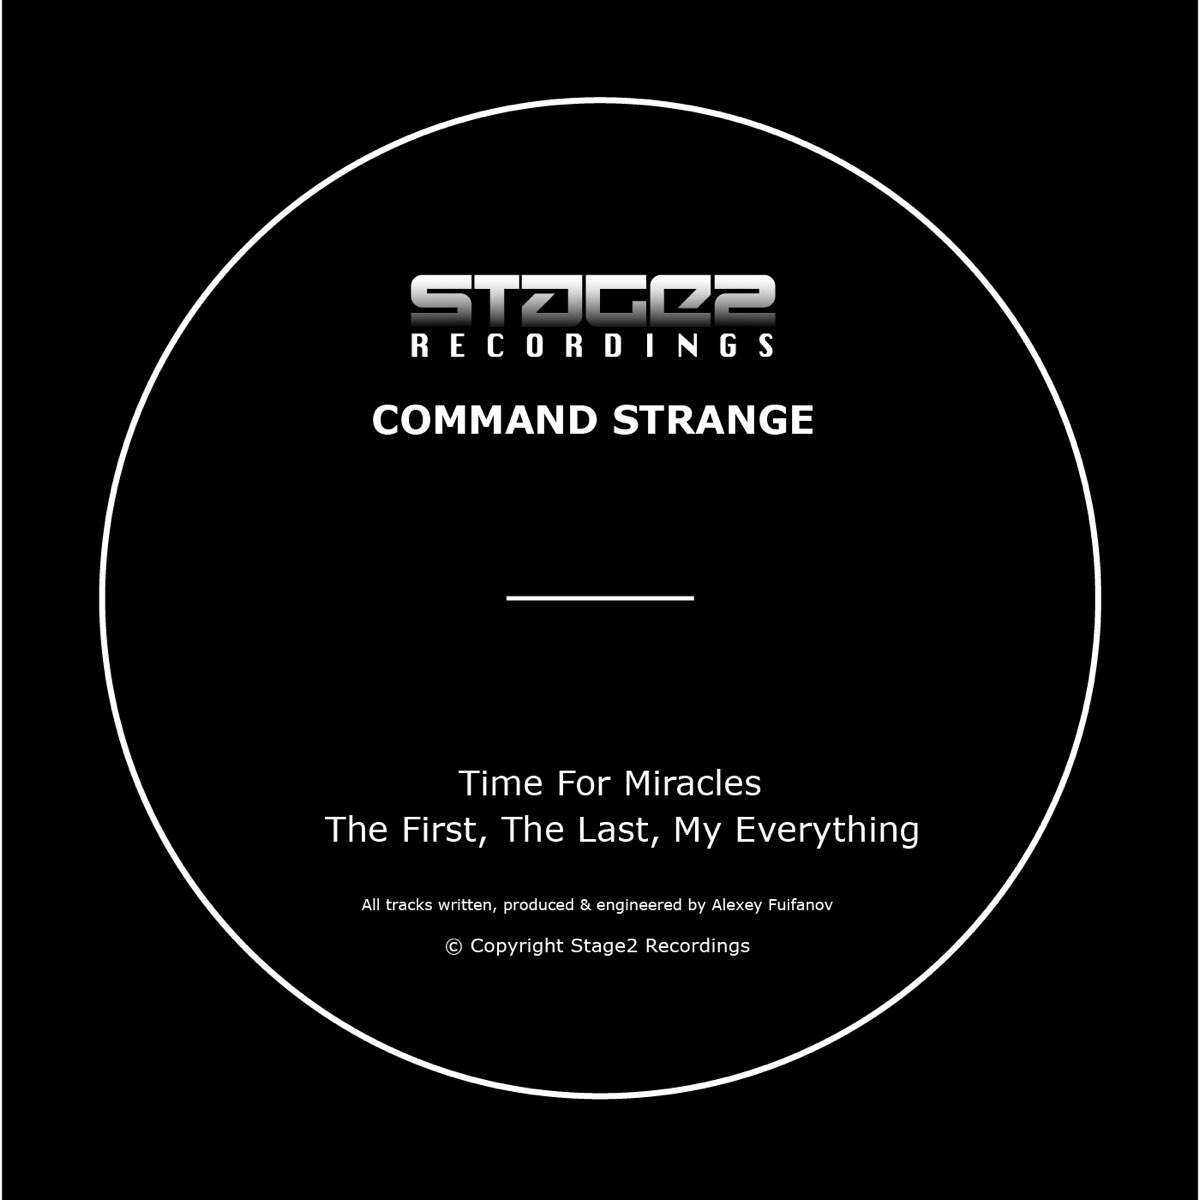 Command Strange – everything / Mirage. Stage Label. Eric Deray - time for Miracles. Command strange